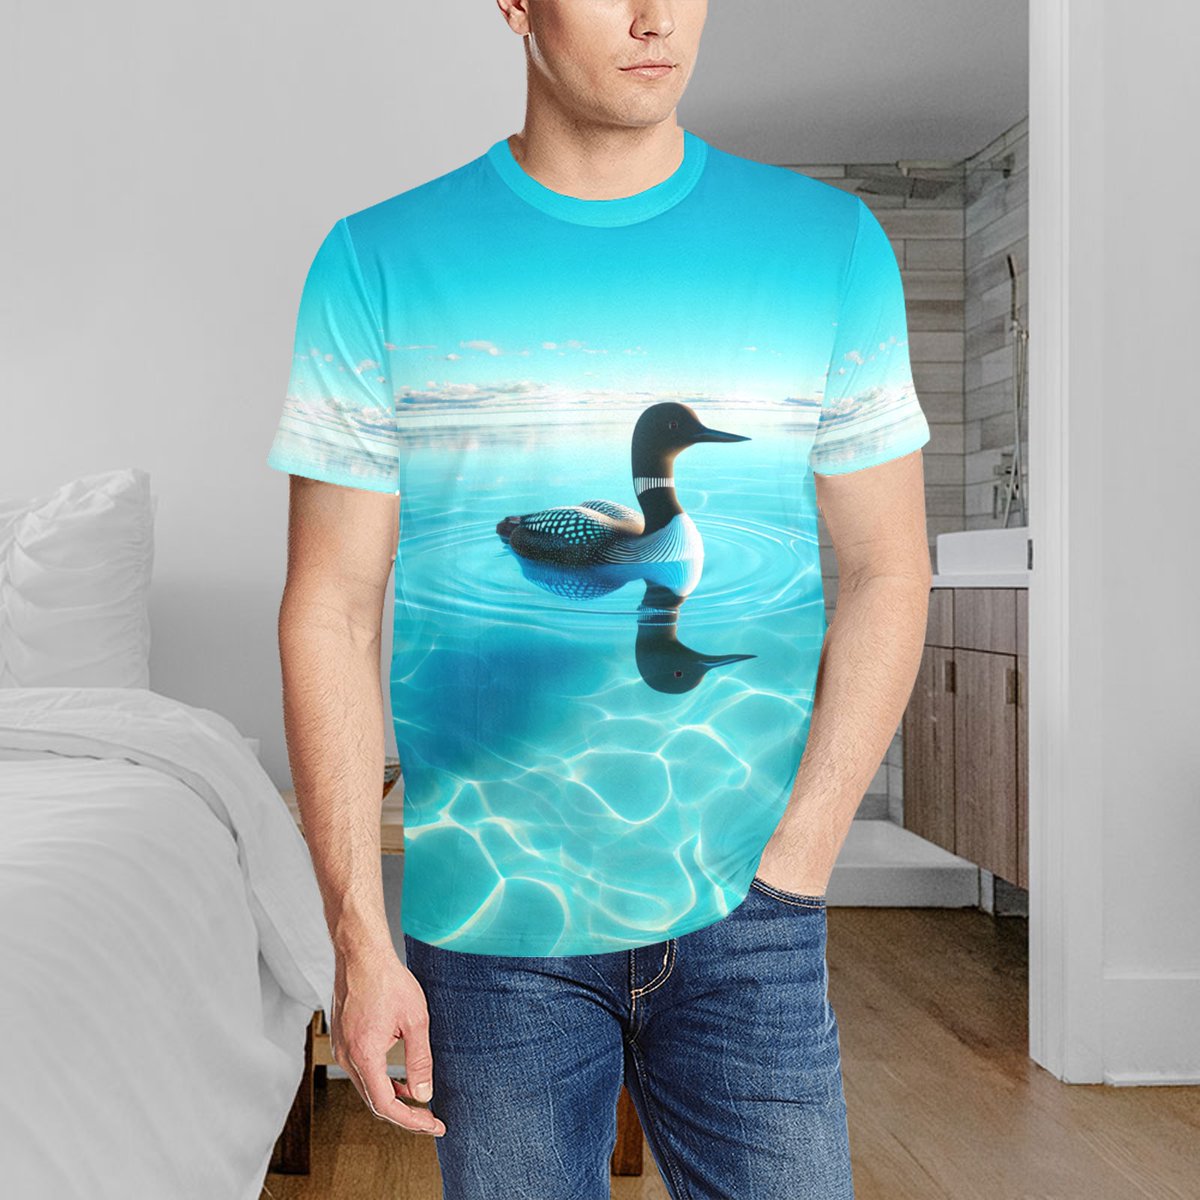 Bring the tranquility of nature into your wardrobe with our Serene Loon on Lake T-shirt. 🌅🦆 Perfect for anyone who loves peaceful, picturesque designs. #CalmFashion #NatureInspired
shhcreations.com/products/seren…